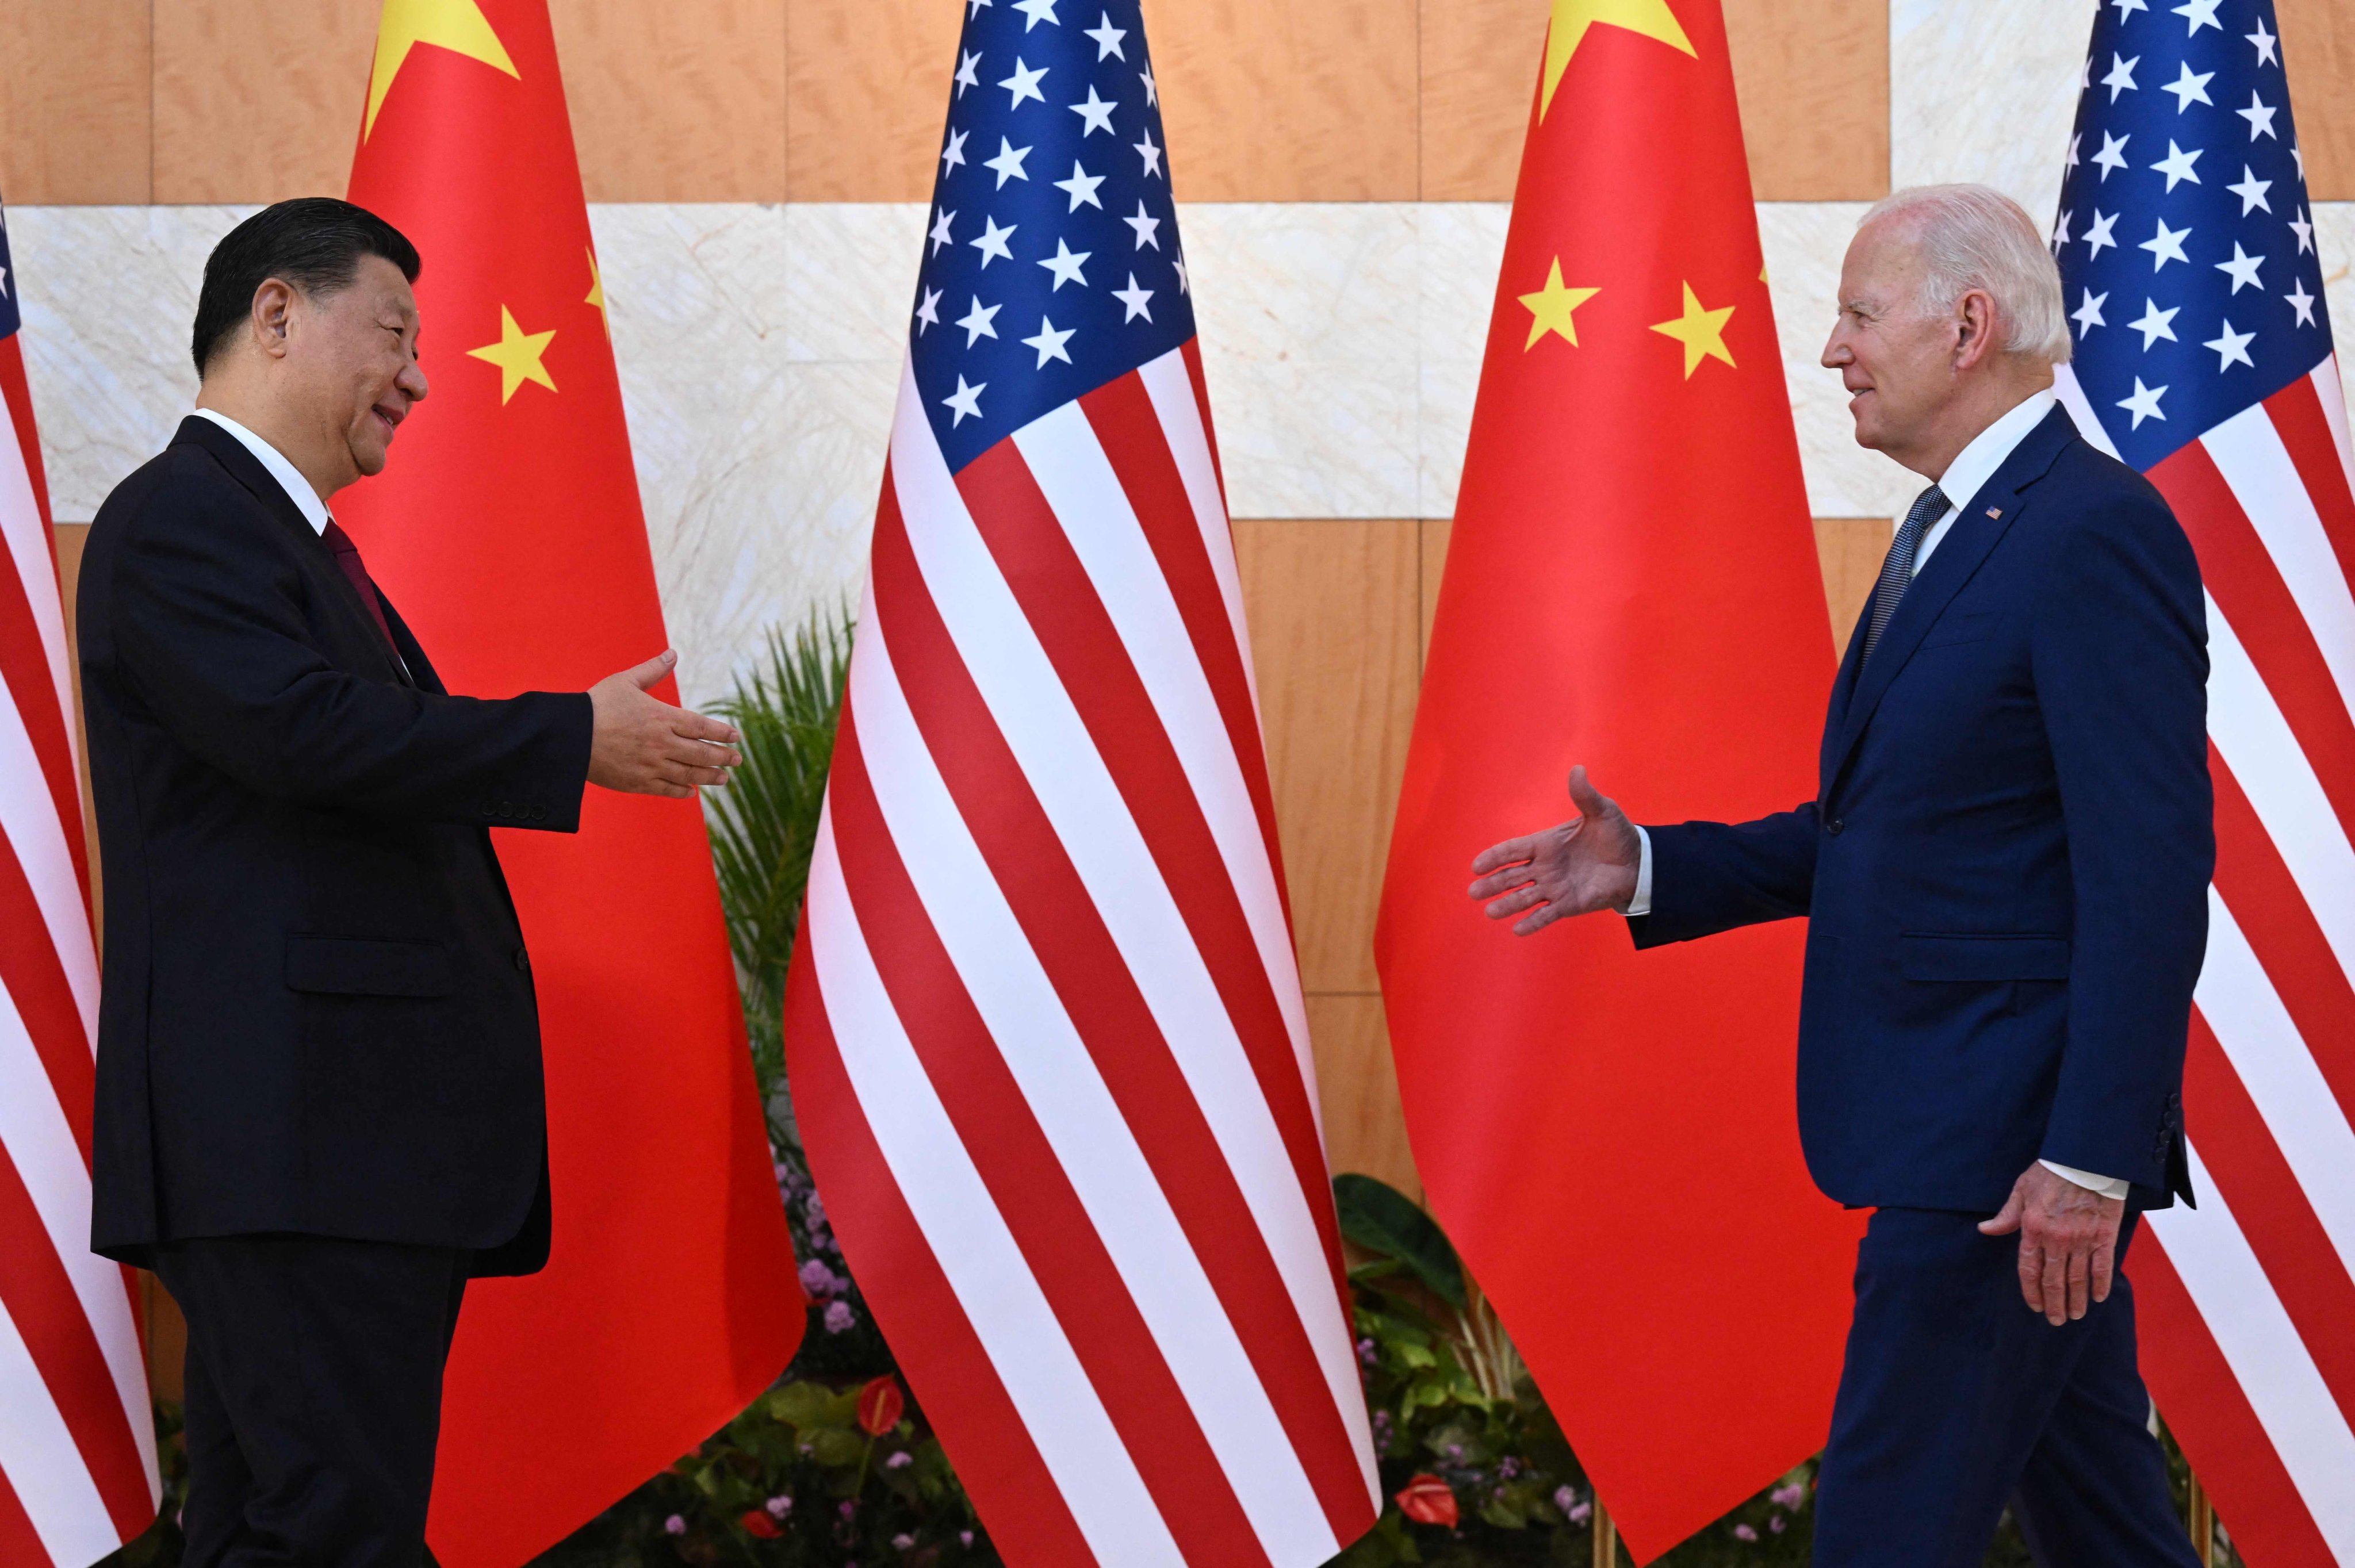 US President Joe Biden and Chinese President Xi Jinping reach out to shake hands as they meet on the sidelines of the G20 Summit in Bali, Indonesia, on November 14. Photo: AFP